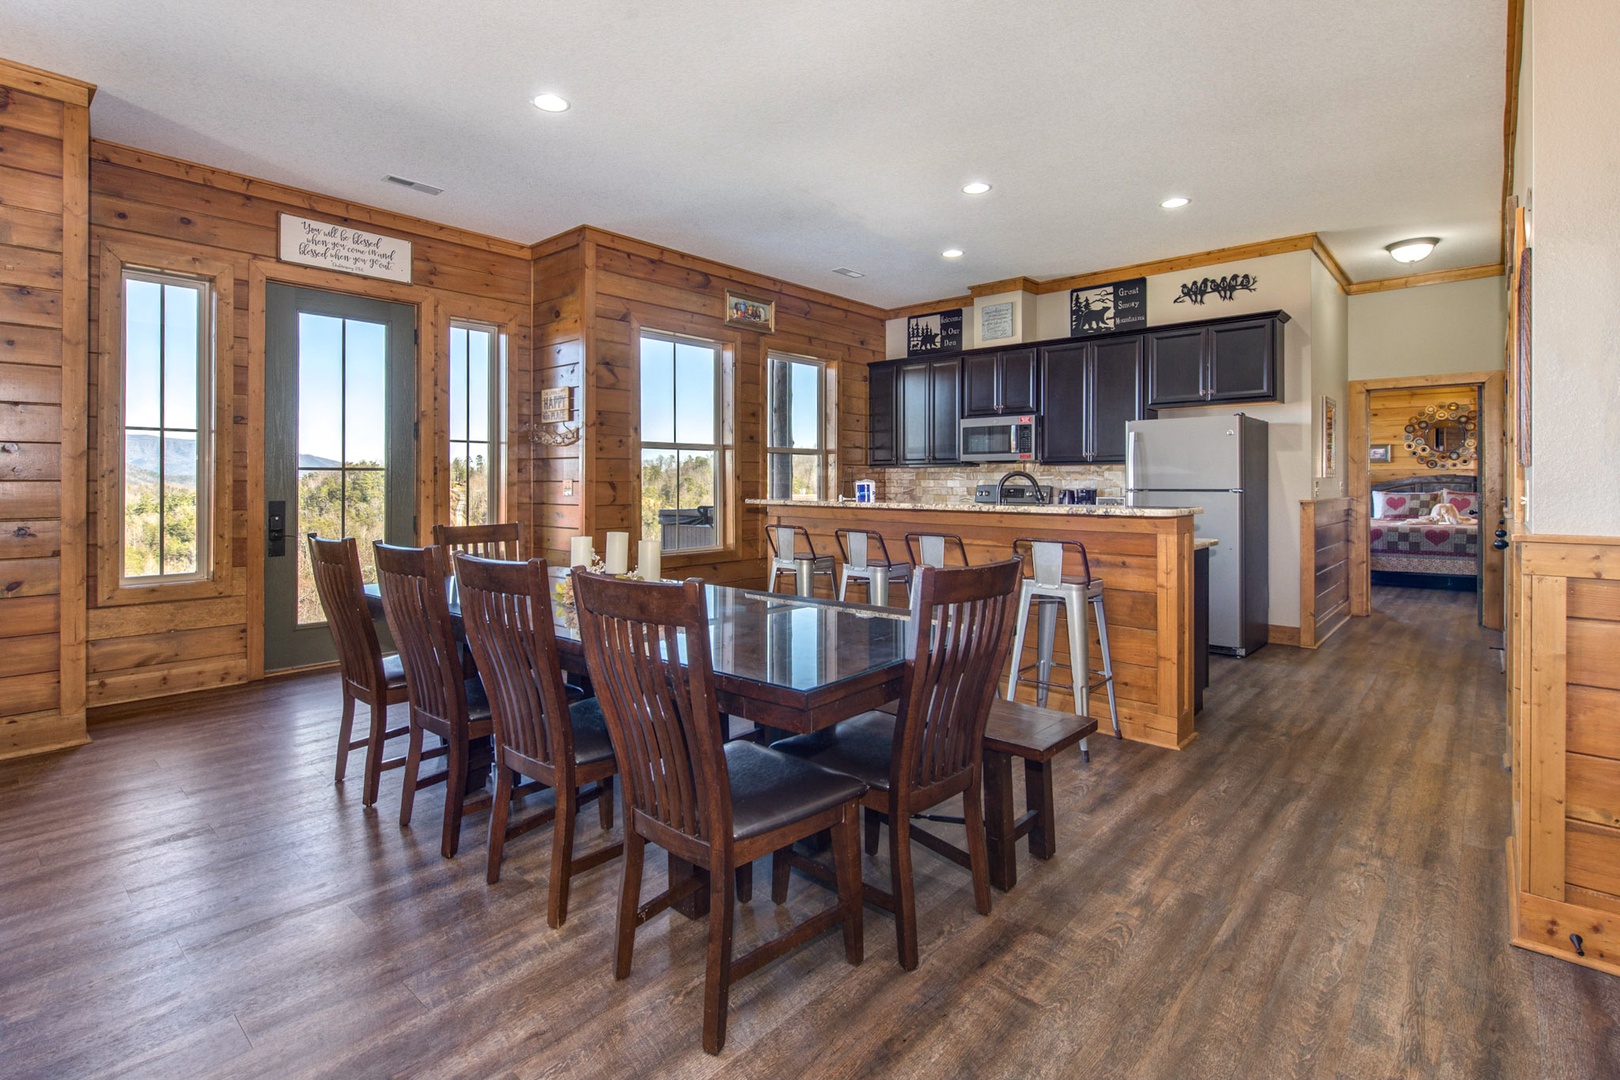 The entire family can gather in the spacious dining room for shared meals.